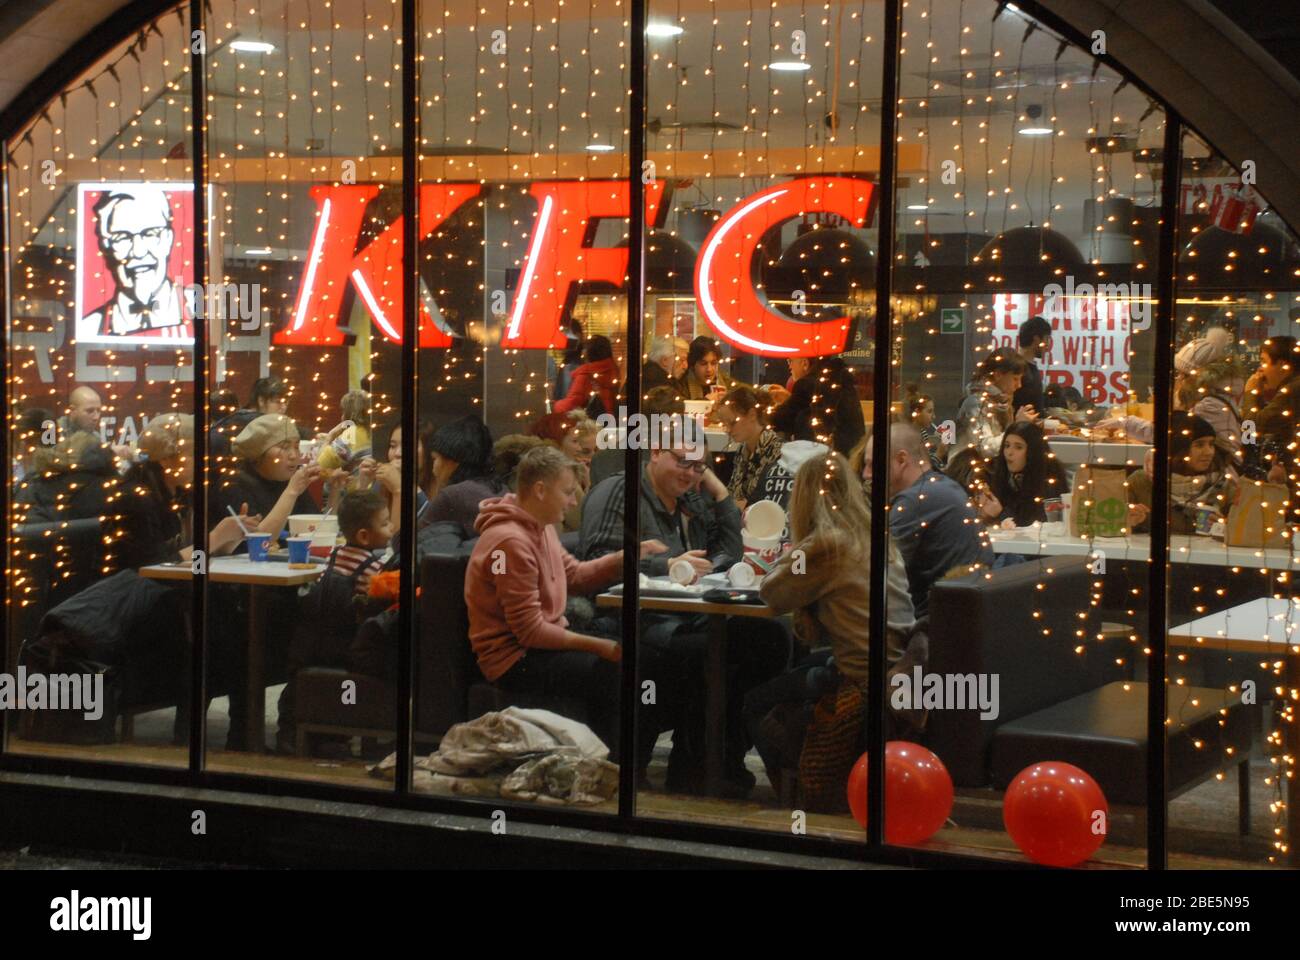 Moscow, RUSSIA - December 19, 2018: Families have dinner at the KFC restaurant in Moscow near the Kremlin. Stock Photo